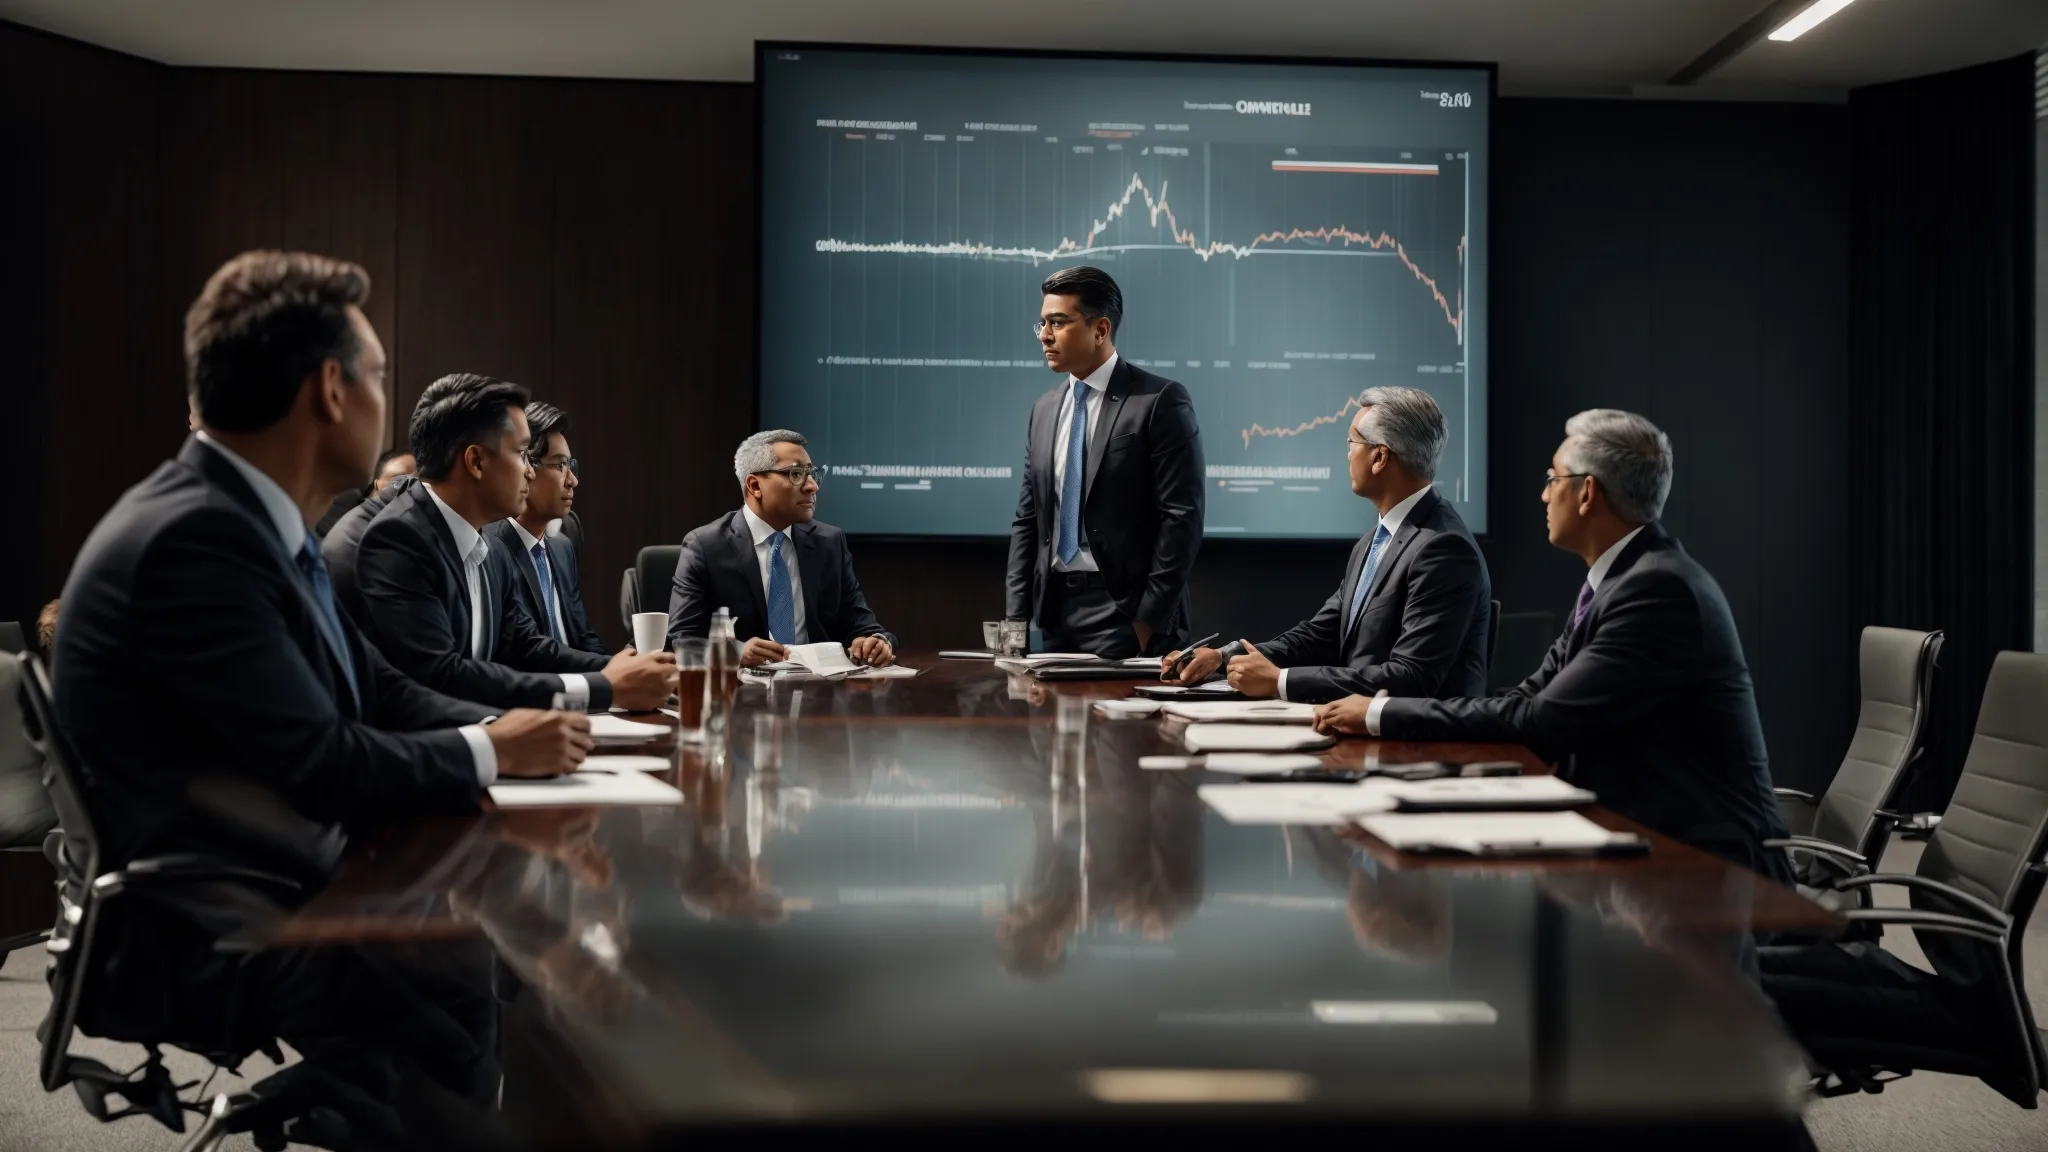 executives discuss around a conference table with growth charts on a presentation screen in the background.